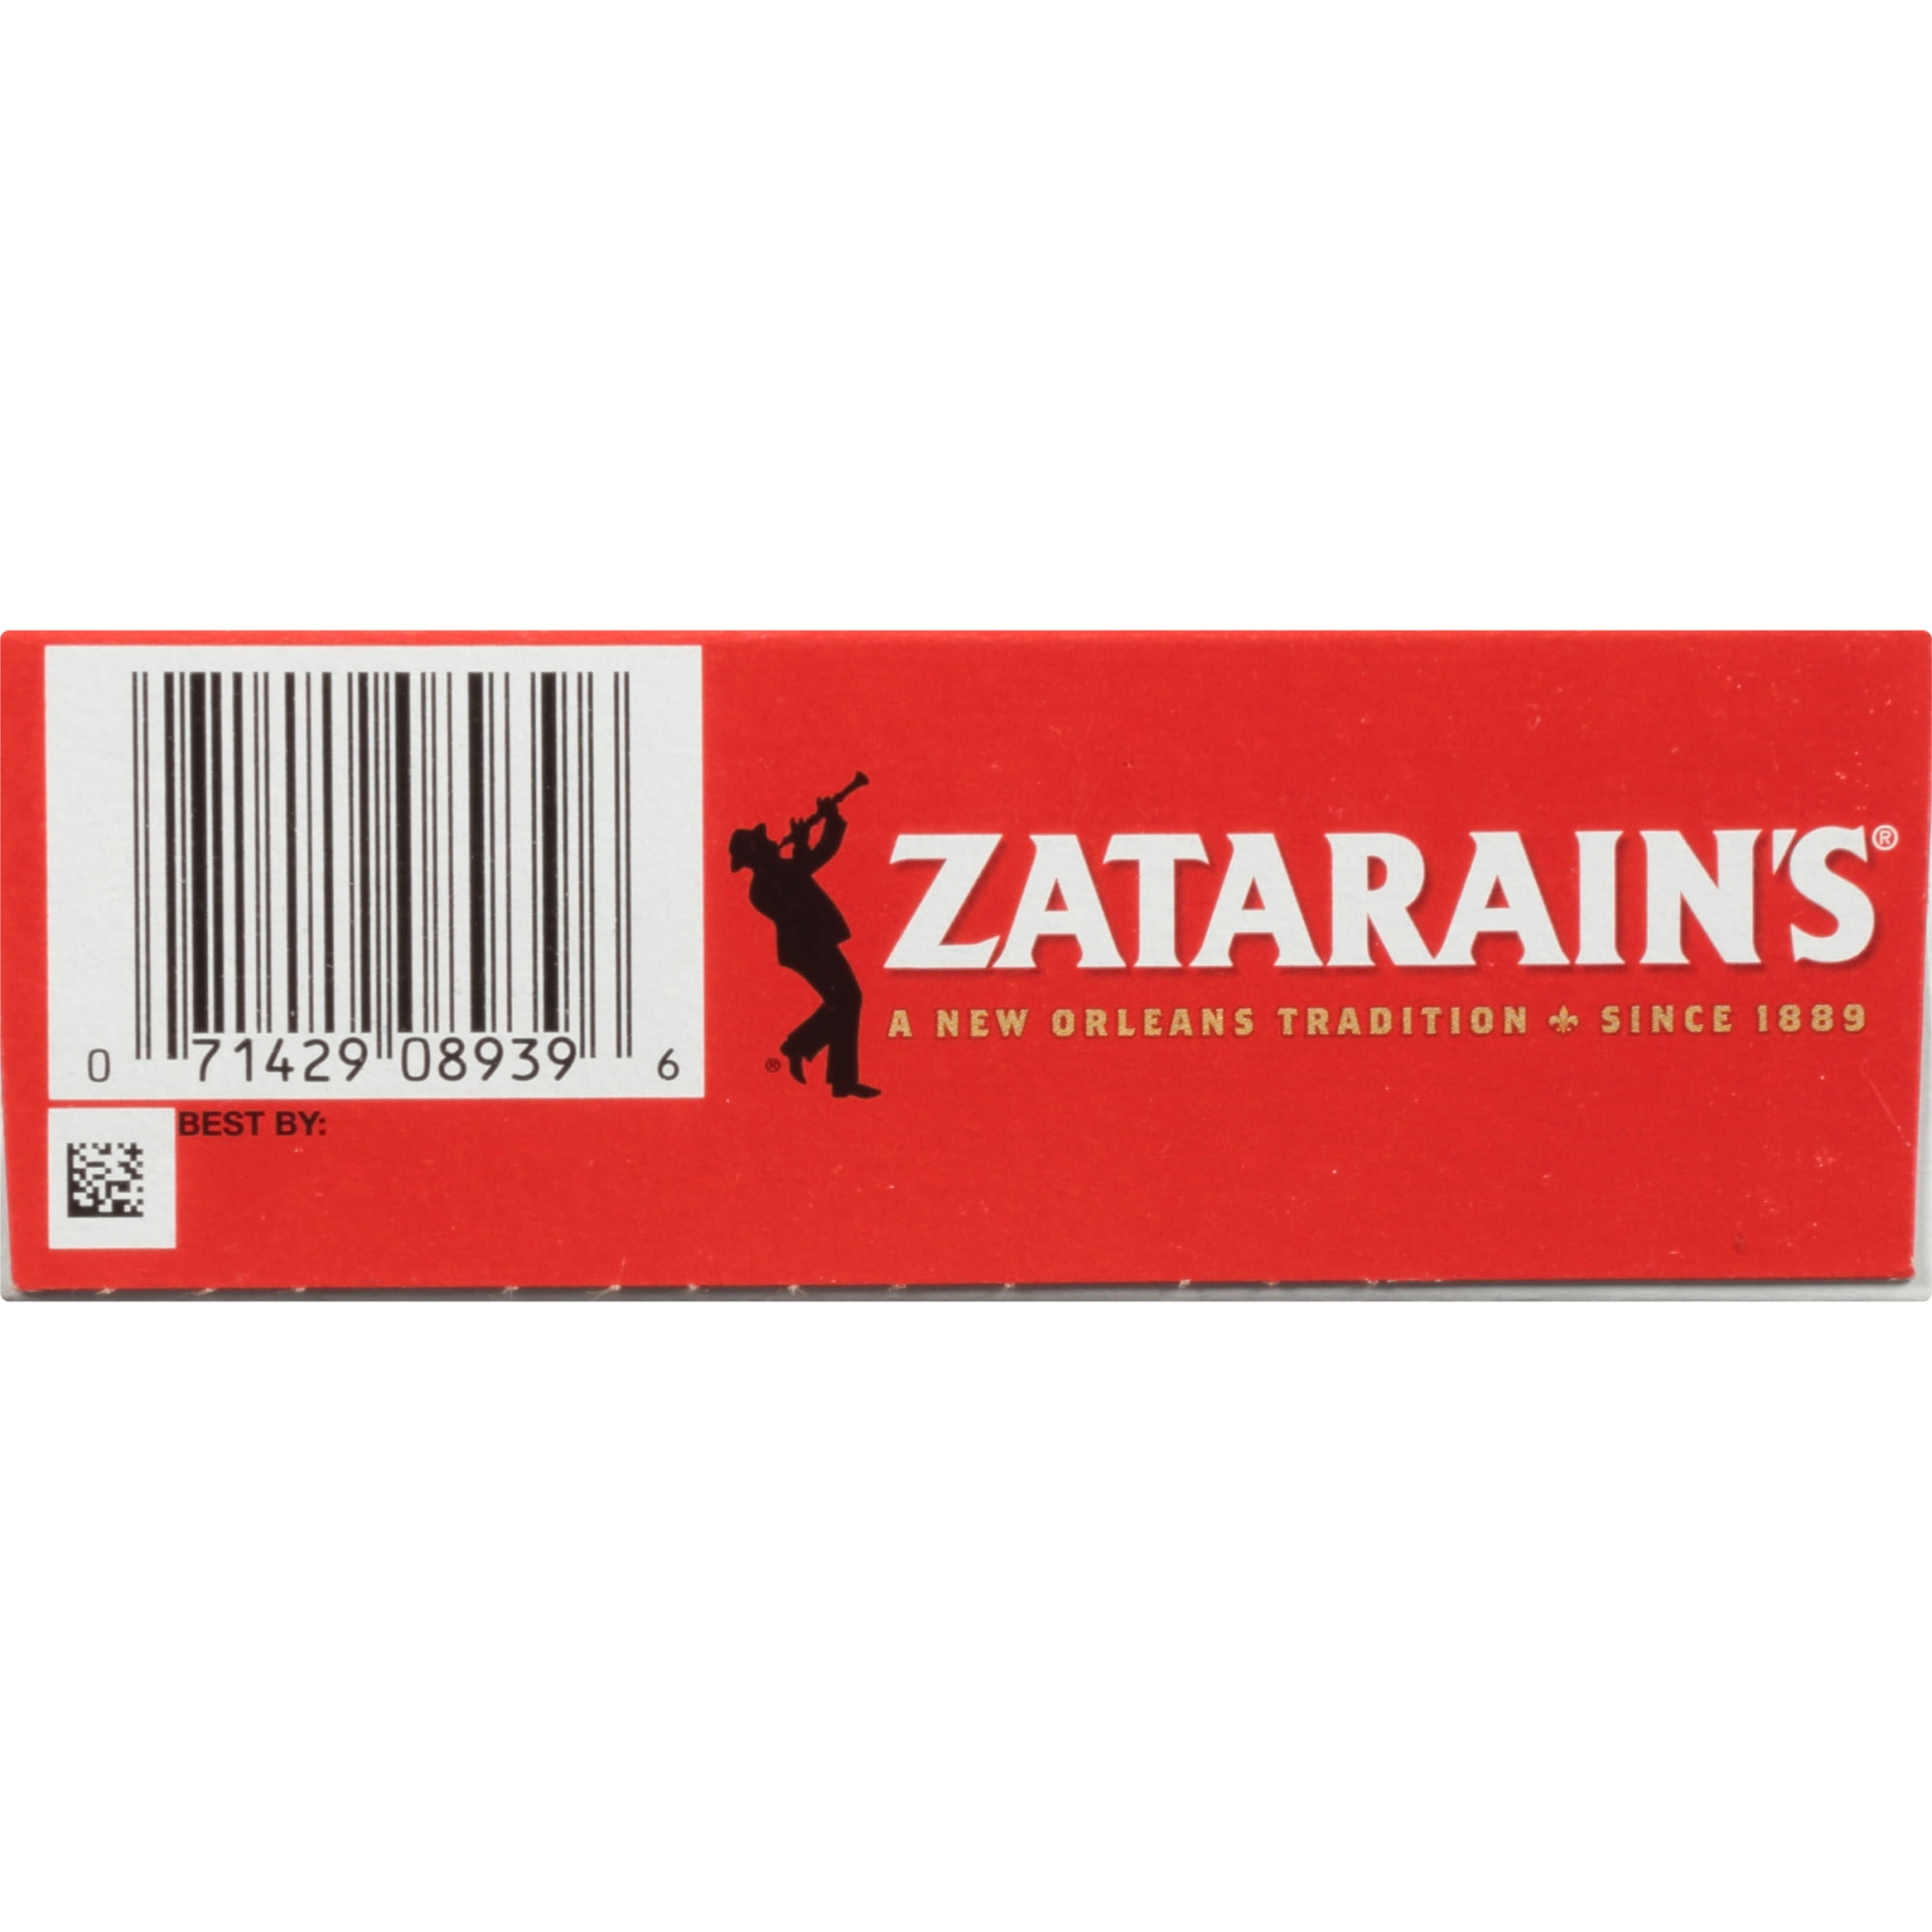 Zatarain's Frozen Meal - Sausage, Red Beans & Rice, 12 oz Meal